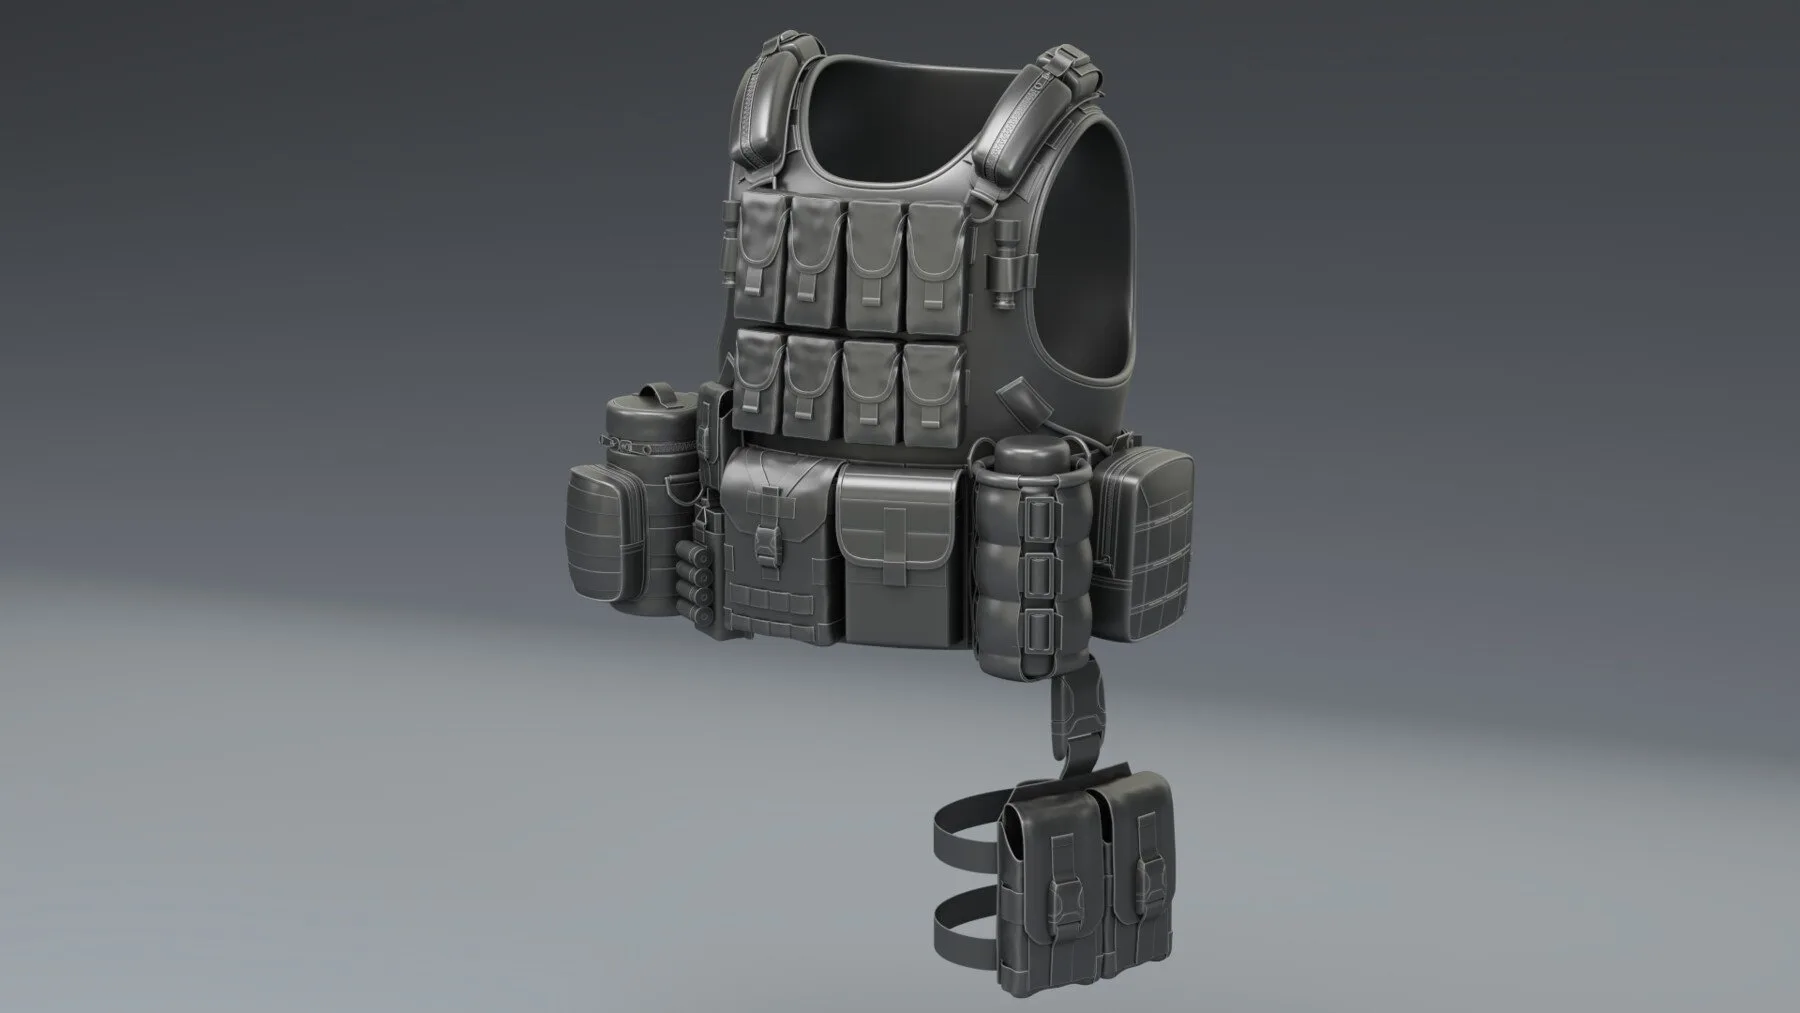 Military Tactical Pouches [Kitbash] [CLEAN TOPOLOGY]